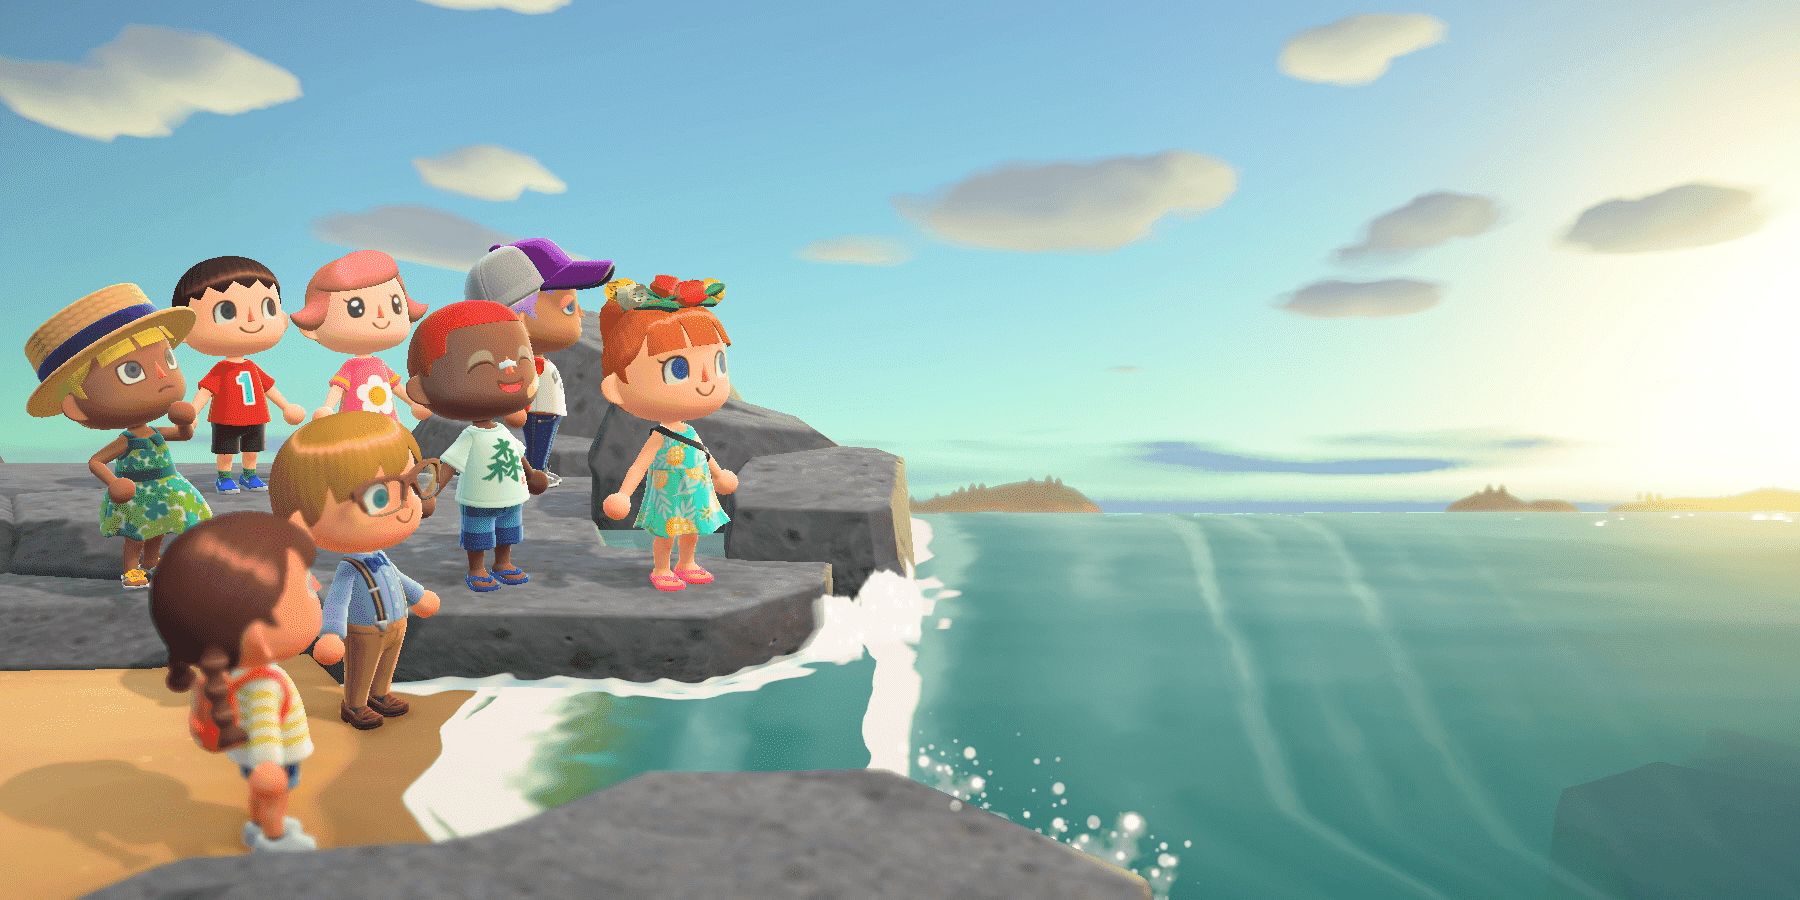 Players gather by the ocean on one person's island and watch the sunset in Animal Crossing: New Horizons.